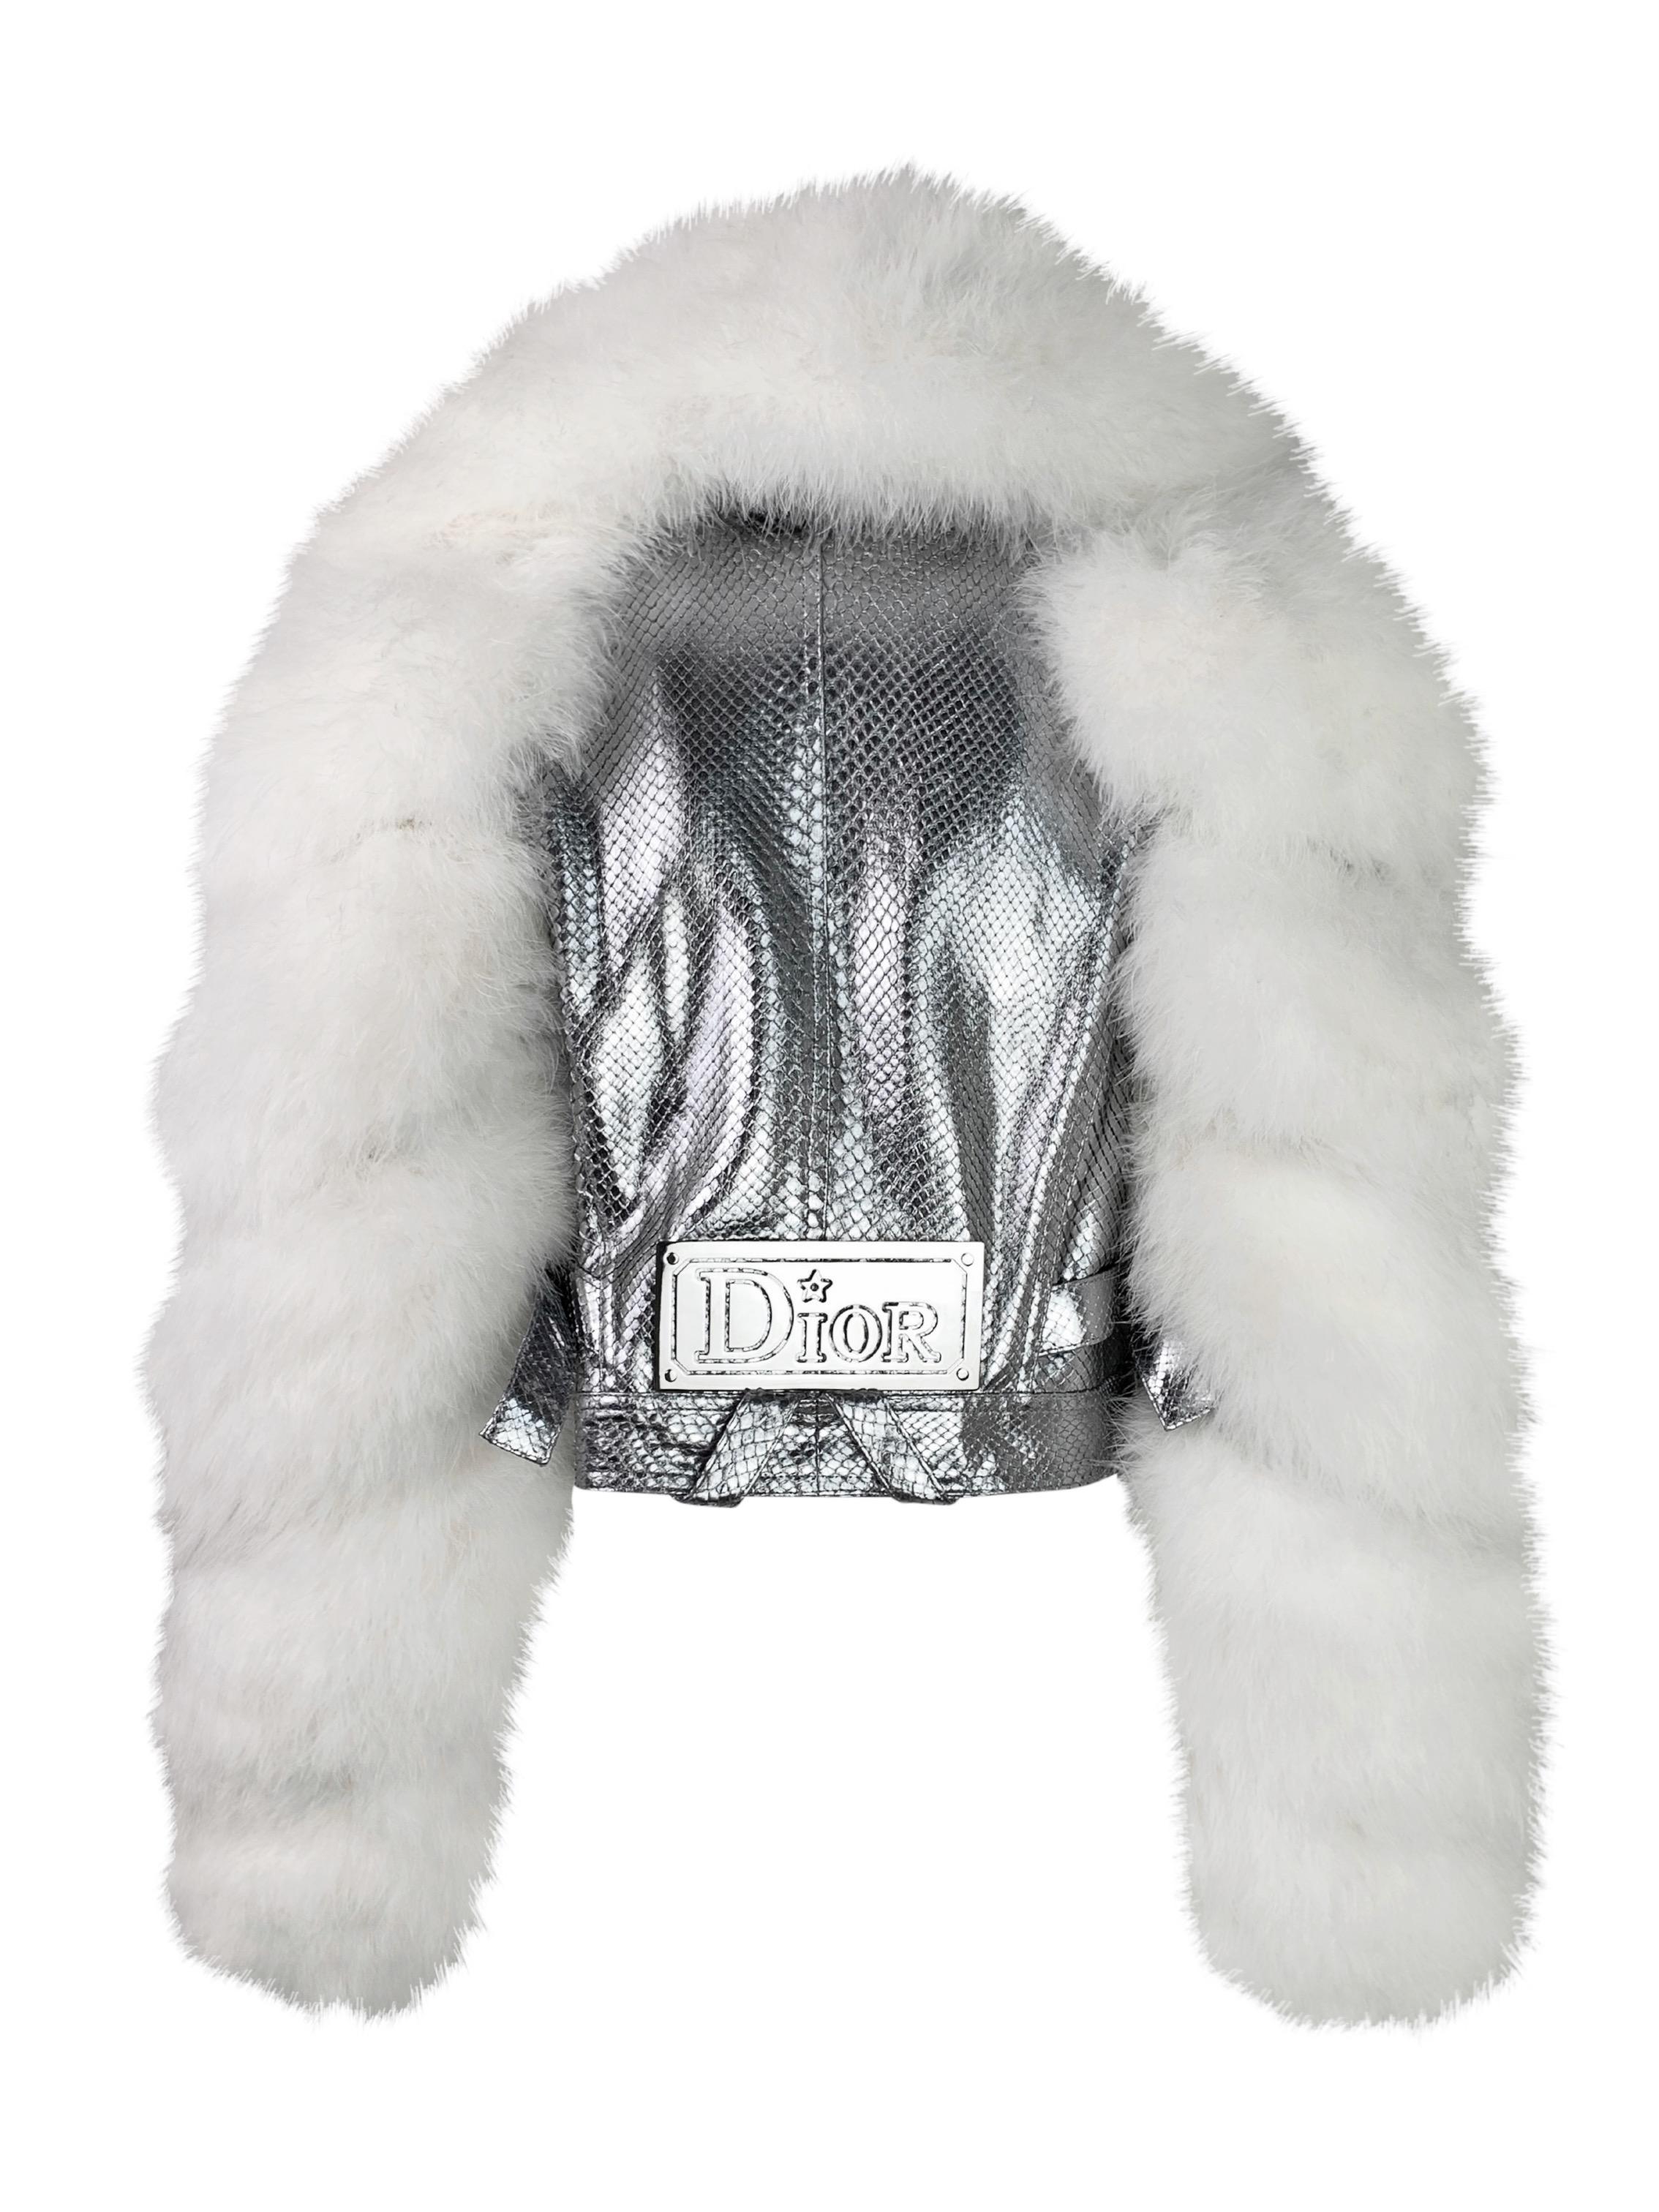 Women's Dior Spring 2004 RTW Silver Python Feather Jacket with a Logo metal plate